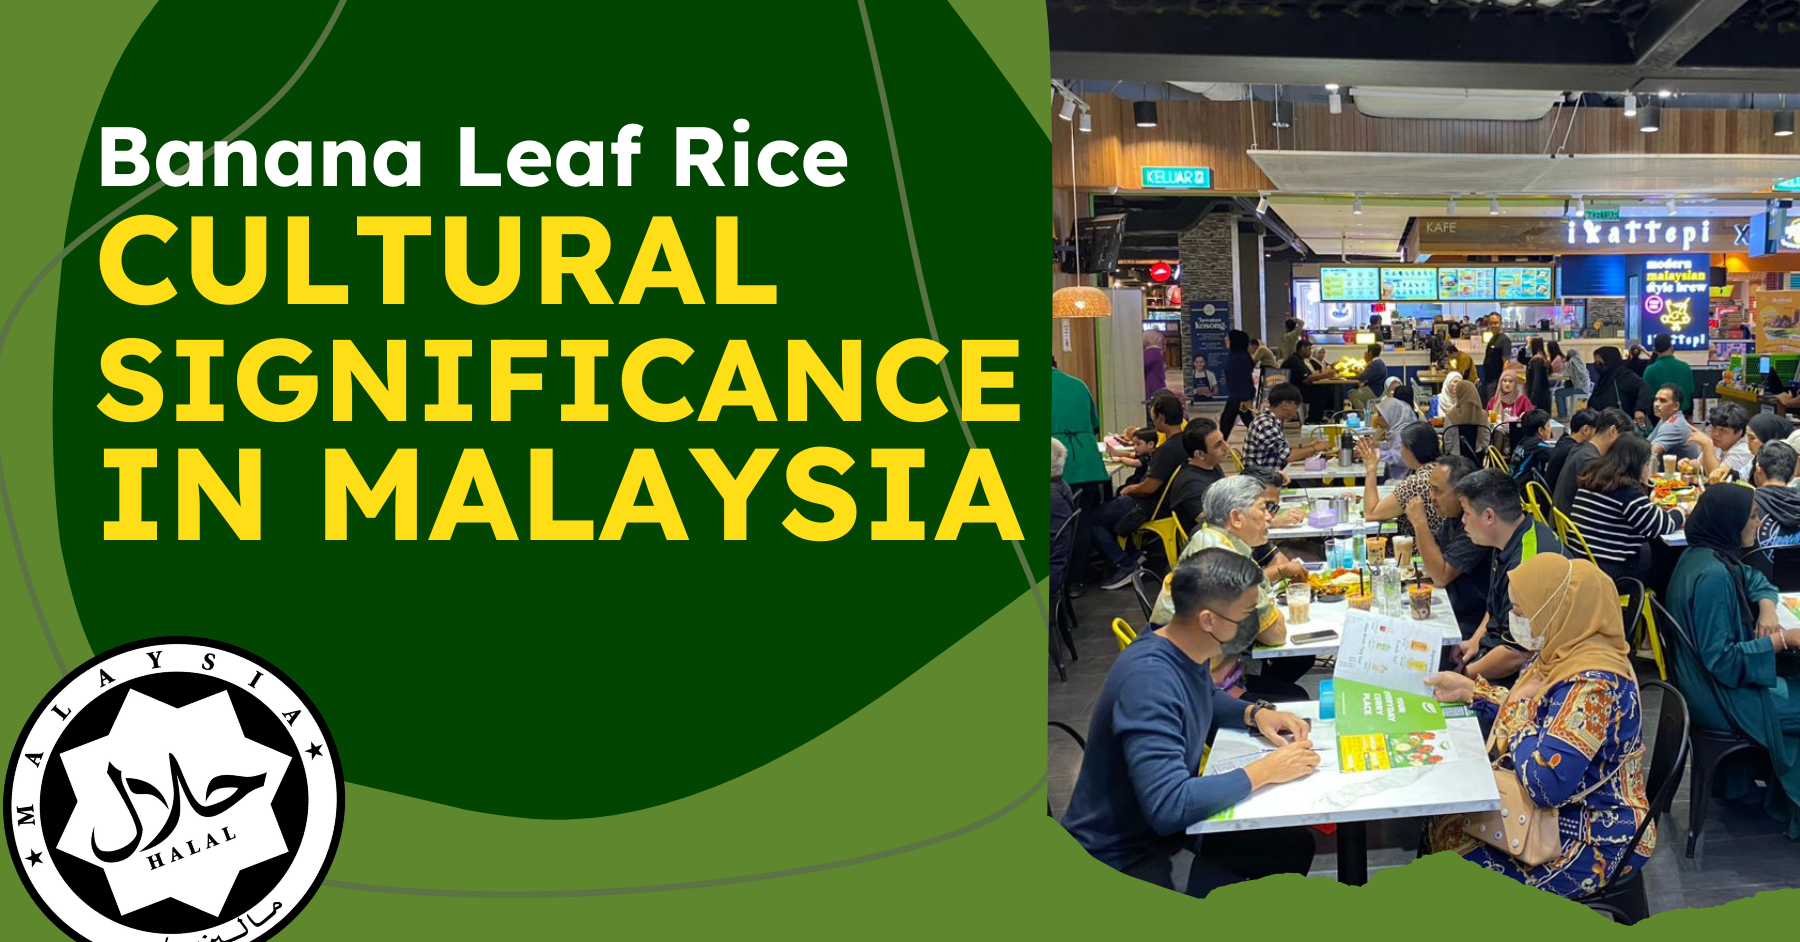 [BananaBro] Exploring the Cultural Significance of Banana Leaf Rice in Malaysia